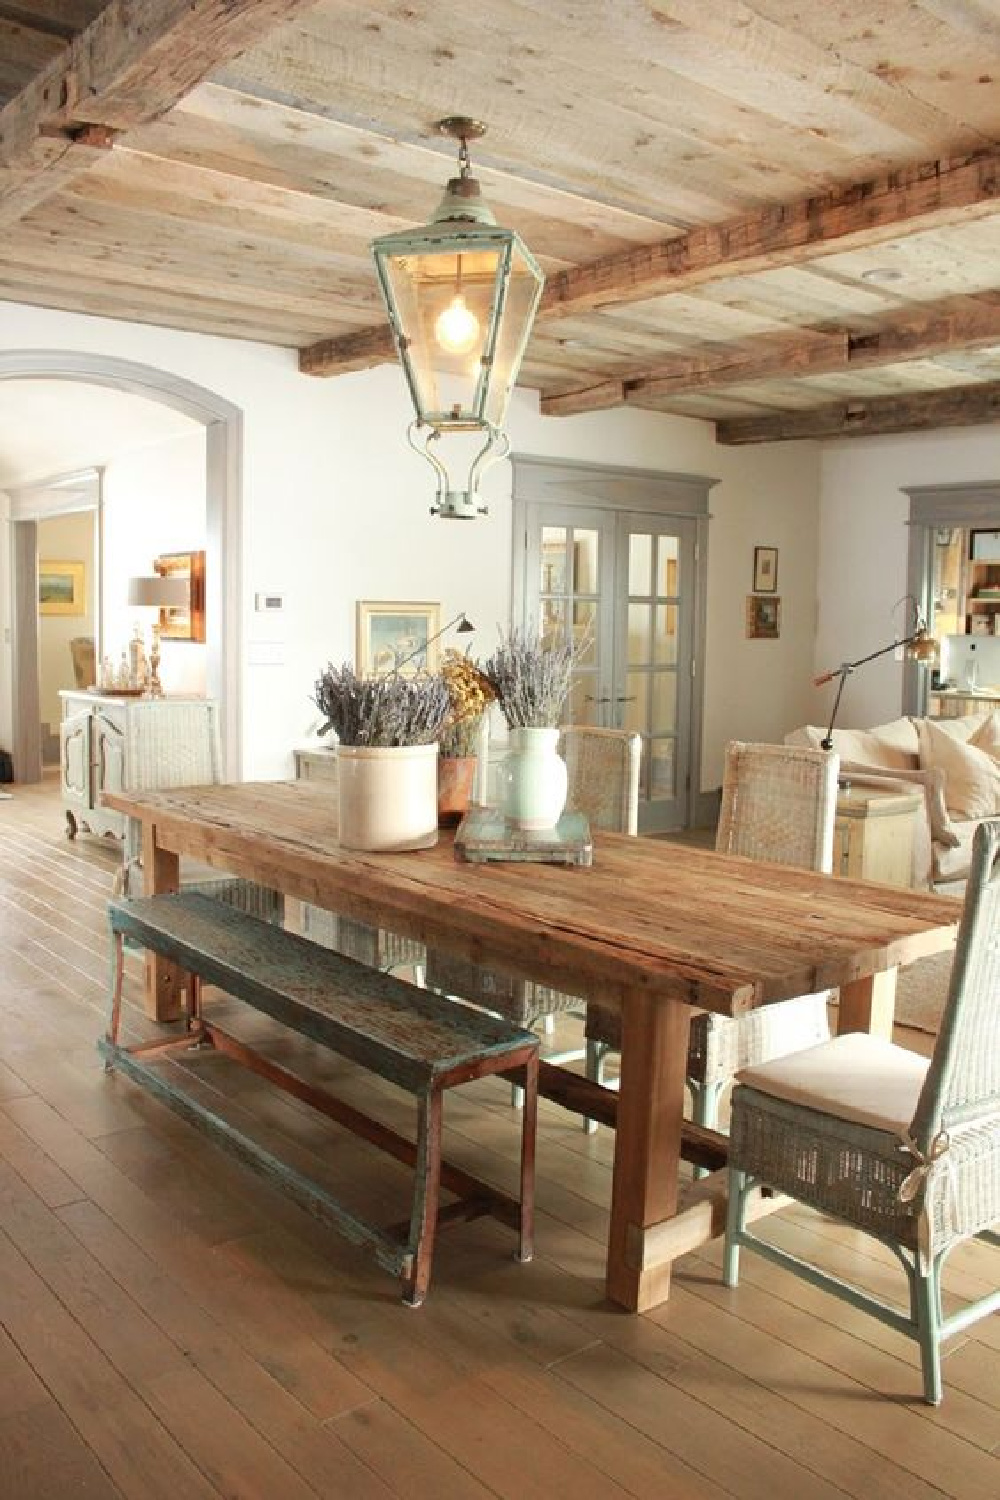 Rustic decor in a charming dining room with French farmhouse decor. Rustic farm table topped with stoneware holding lavender, knotty wood ceiling, vintage lantern, and blue grey trim throughout this home by Desiree Ashworth of Decor de Provence. Beautiful French Farmhouse Decor Images #frenchfarmhouse #vintagelantern #rusticdecor #diningroom #frenchcountry